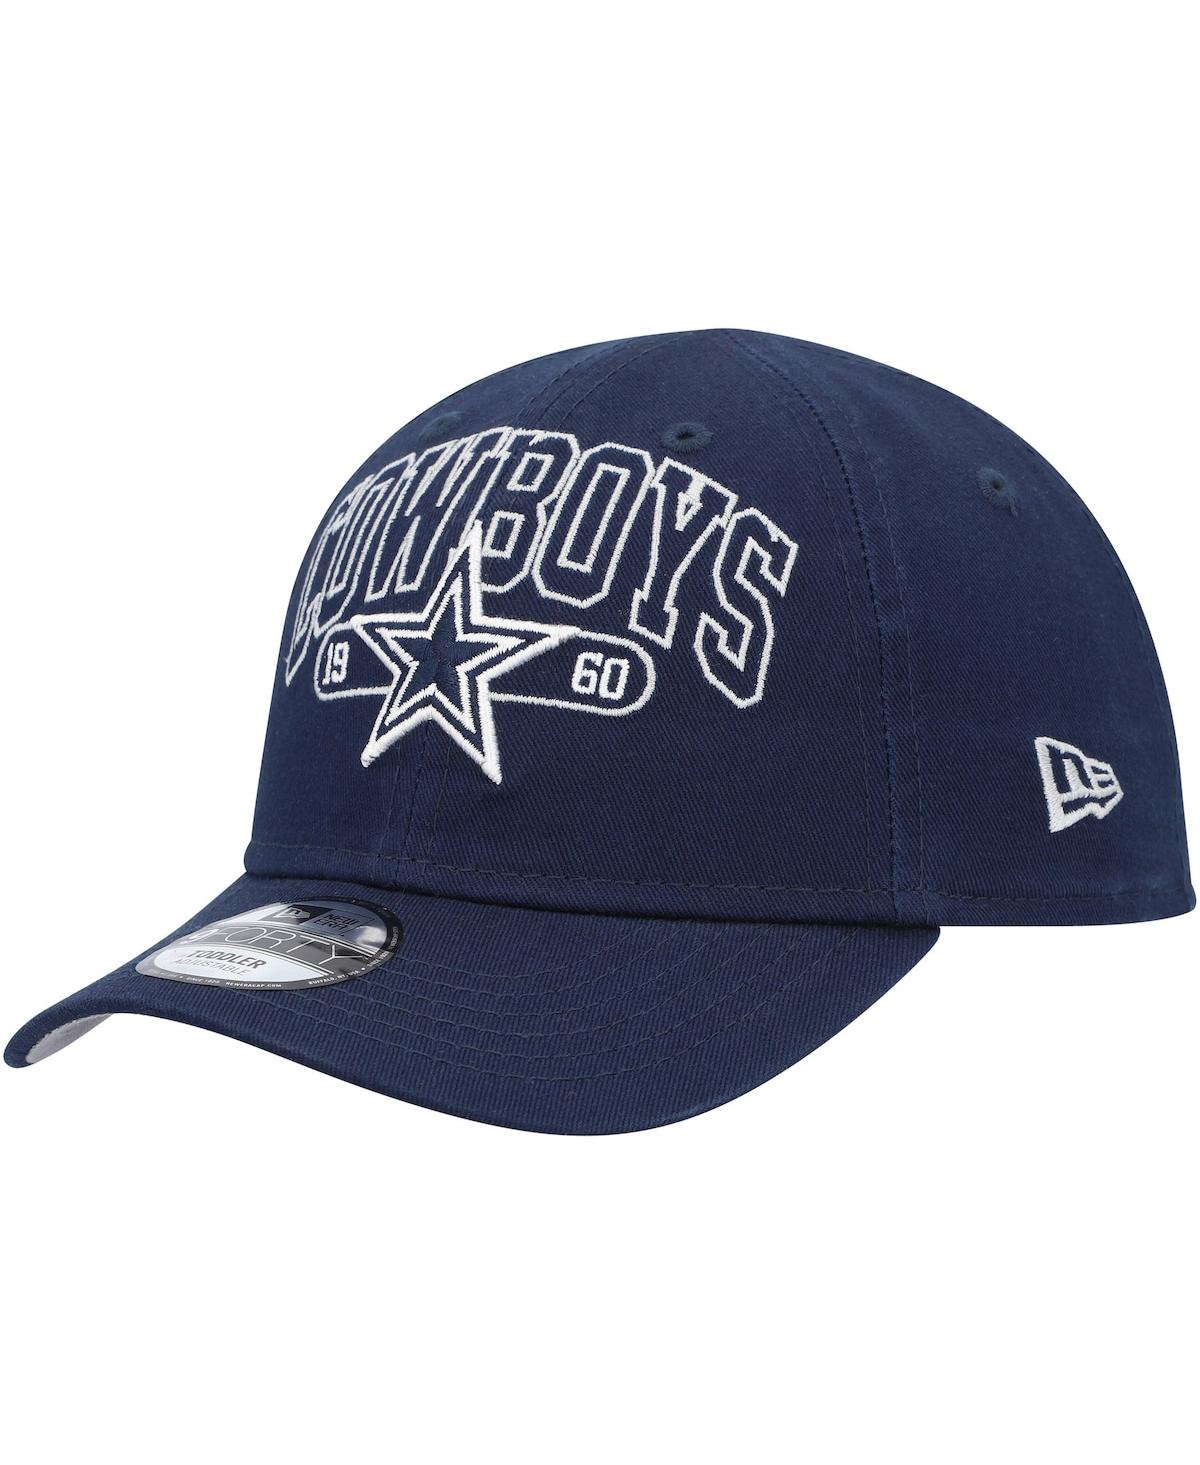 New Era Babies' Toddler Boys And Girls  Navy Dallas Cowboys Outline 9forty Adjustable Hat